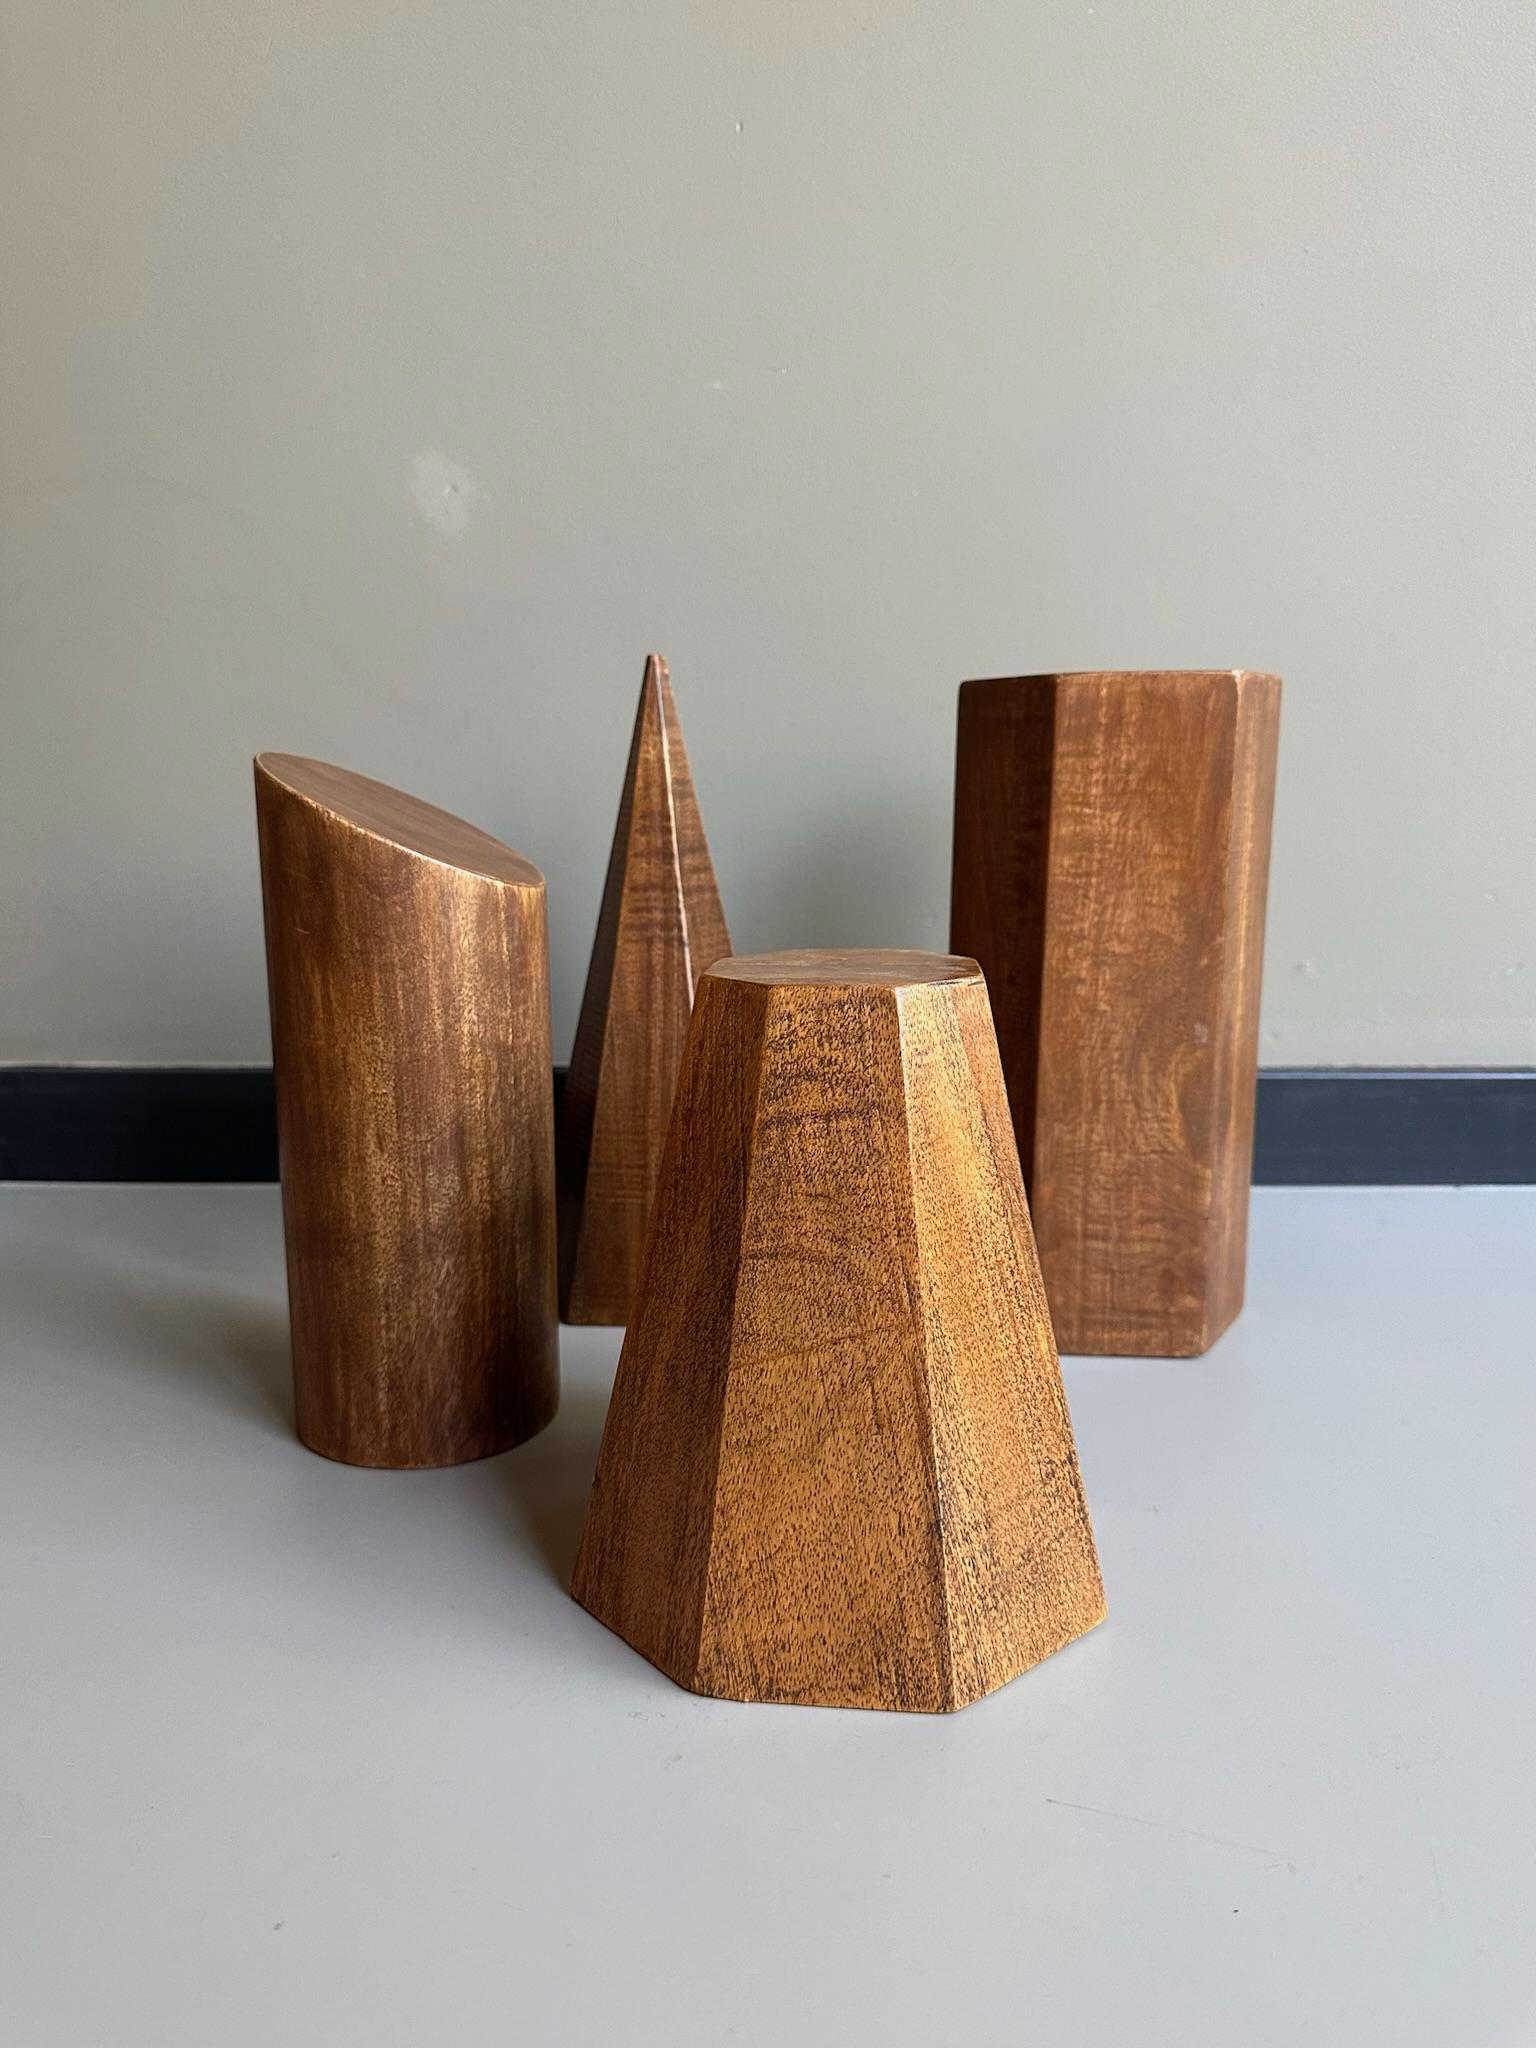 Four vintage geometric shapes used in classes for mathematics.

Probably made in Brussels, Belgium in the 1930s.

Beautiful shaped not only used for mathematic classes but also for art classes.
Now wonderful to use to style a desk or cabinet.

Four